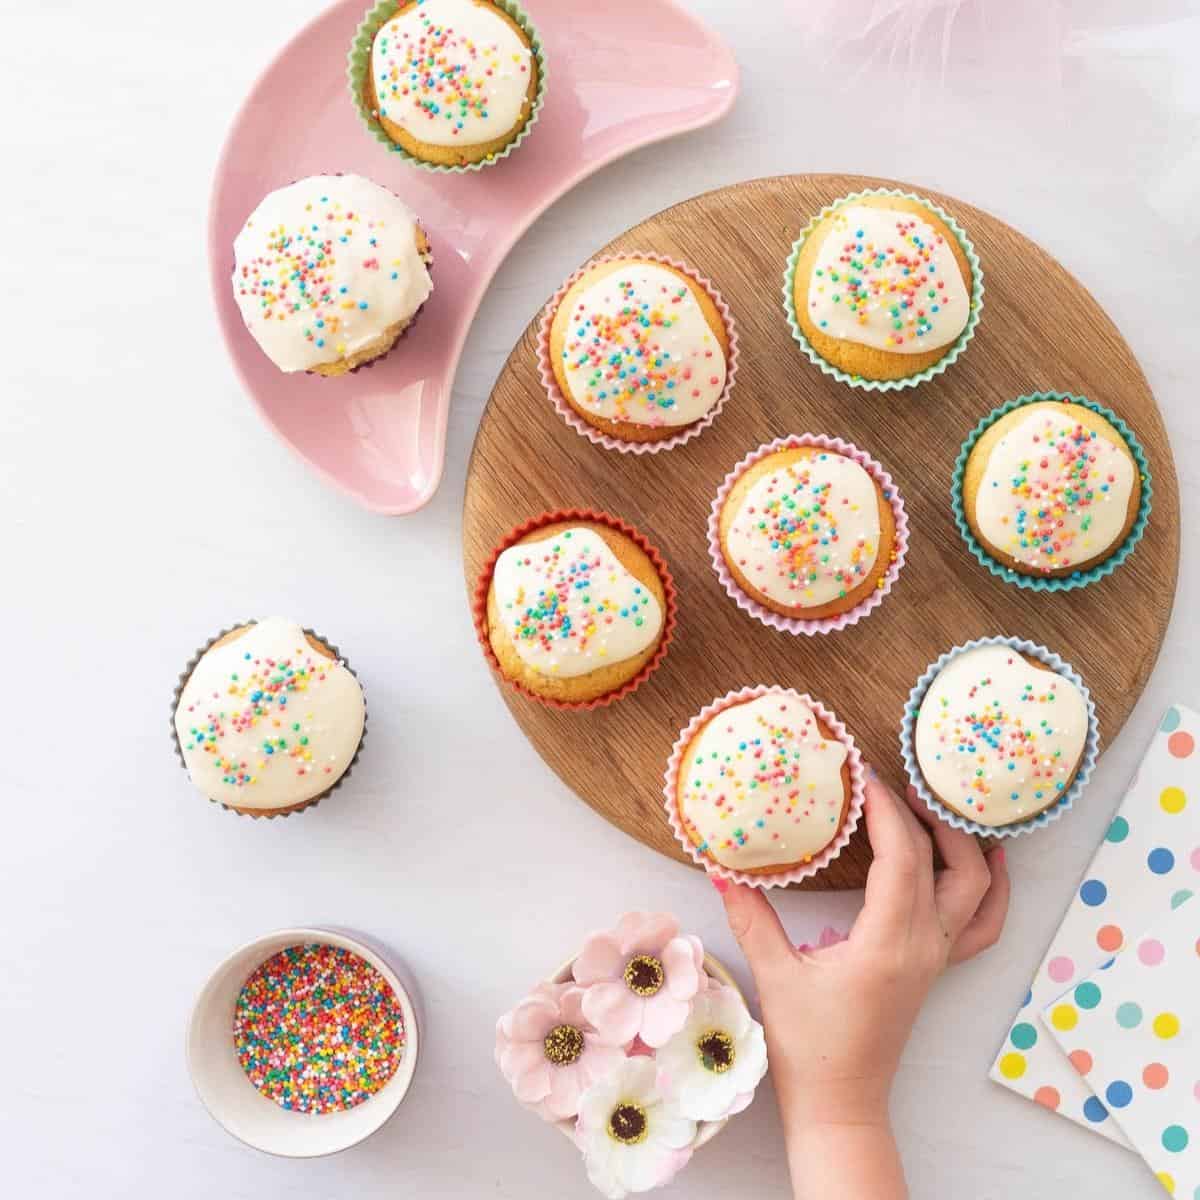 A child's hand reaching for cupcakes decorated with white frosting and sprinkles on a wooden chopping board.